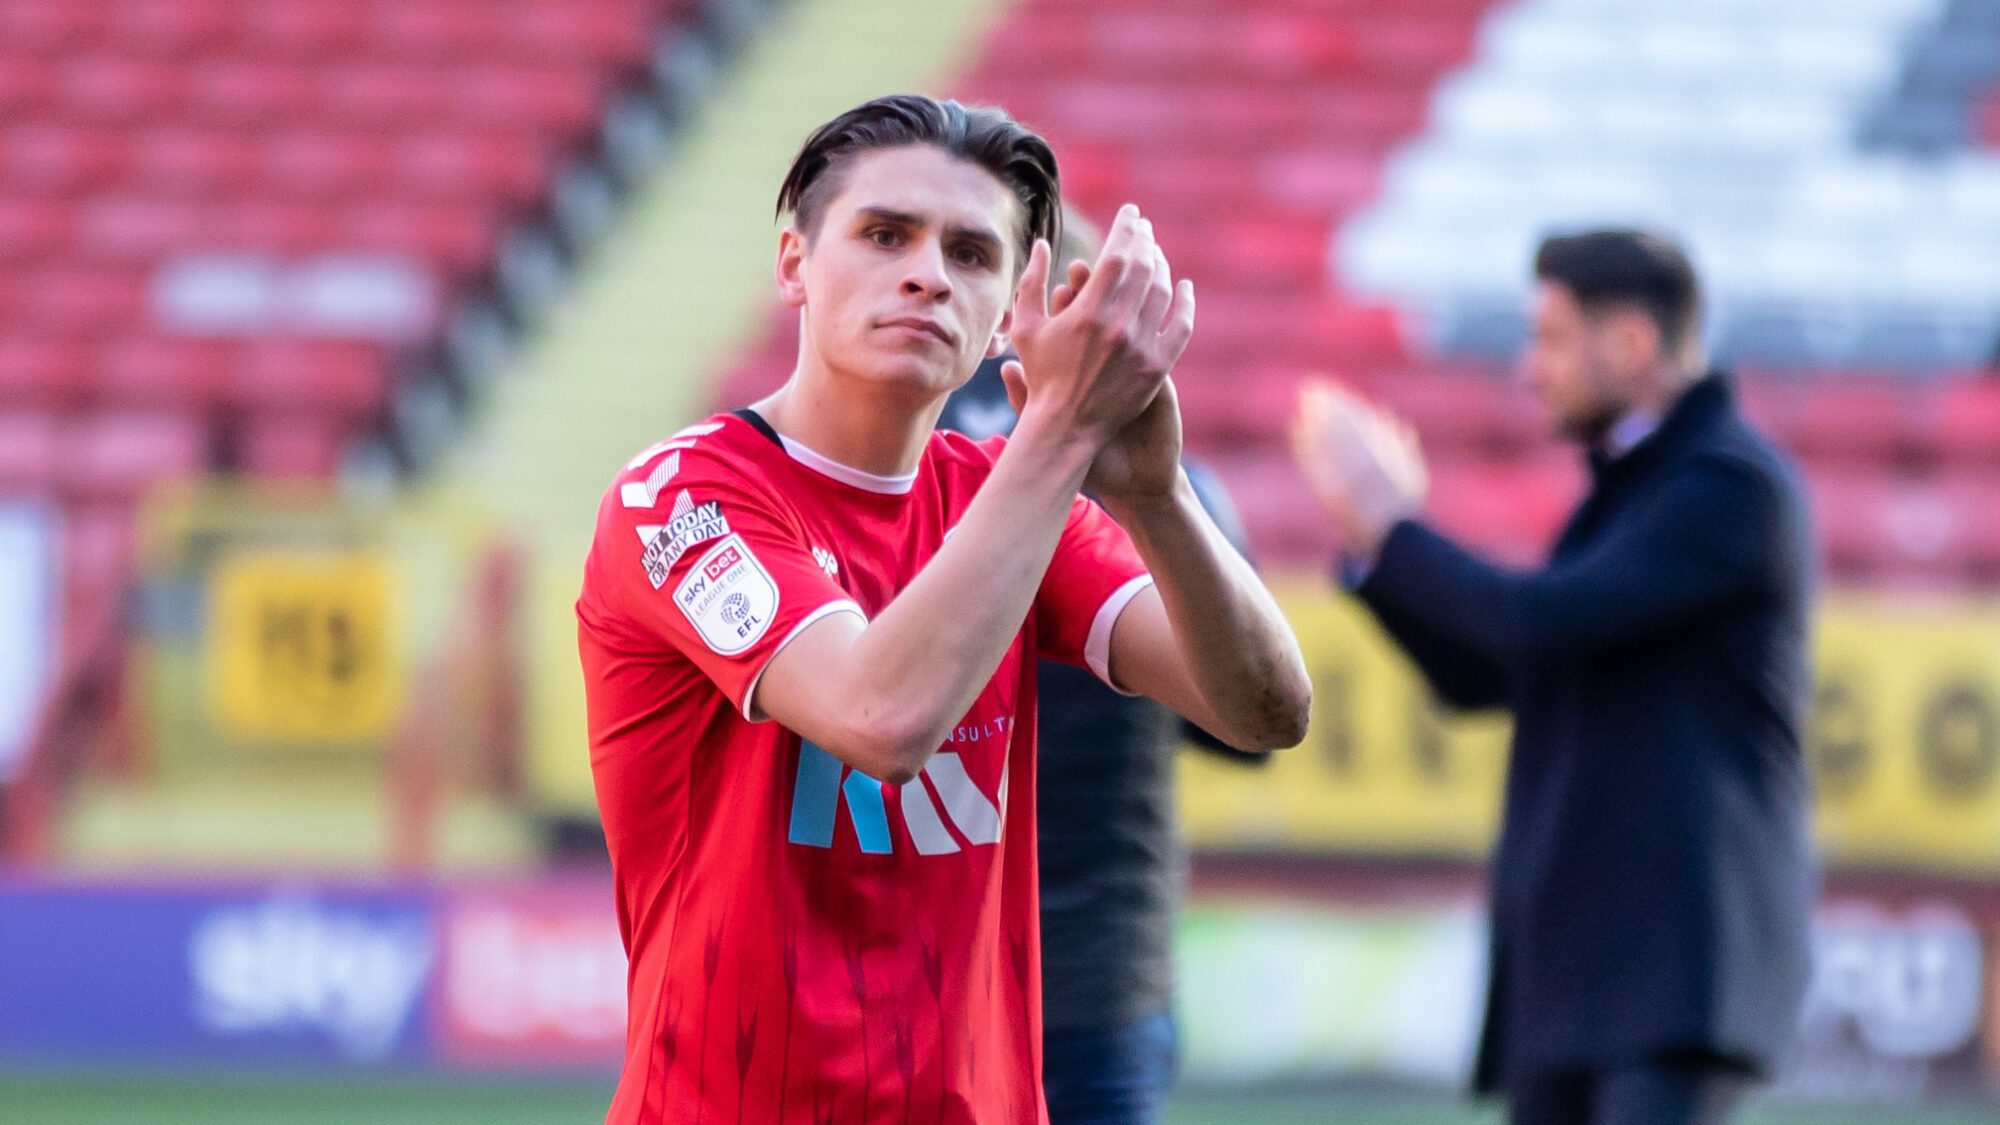 George Dobson wins Charlton Athletic’s Player of the Year award – South London News